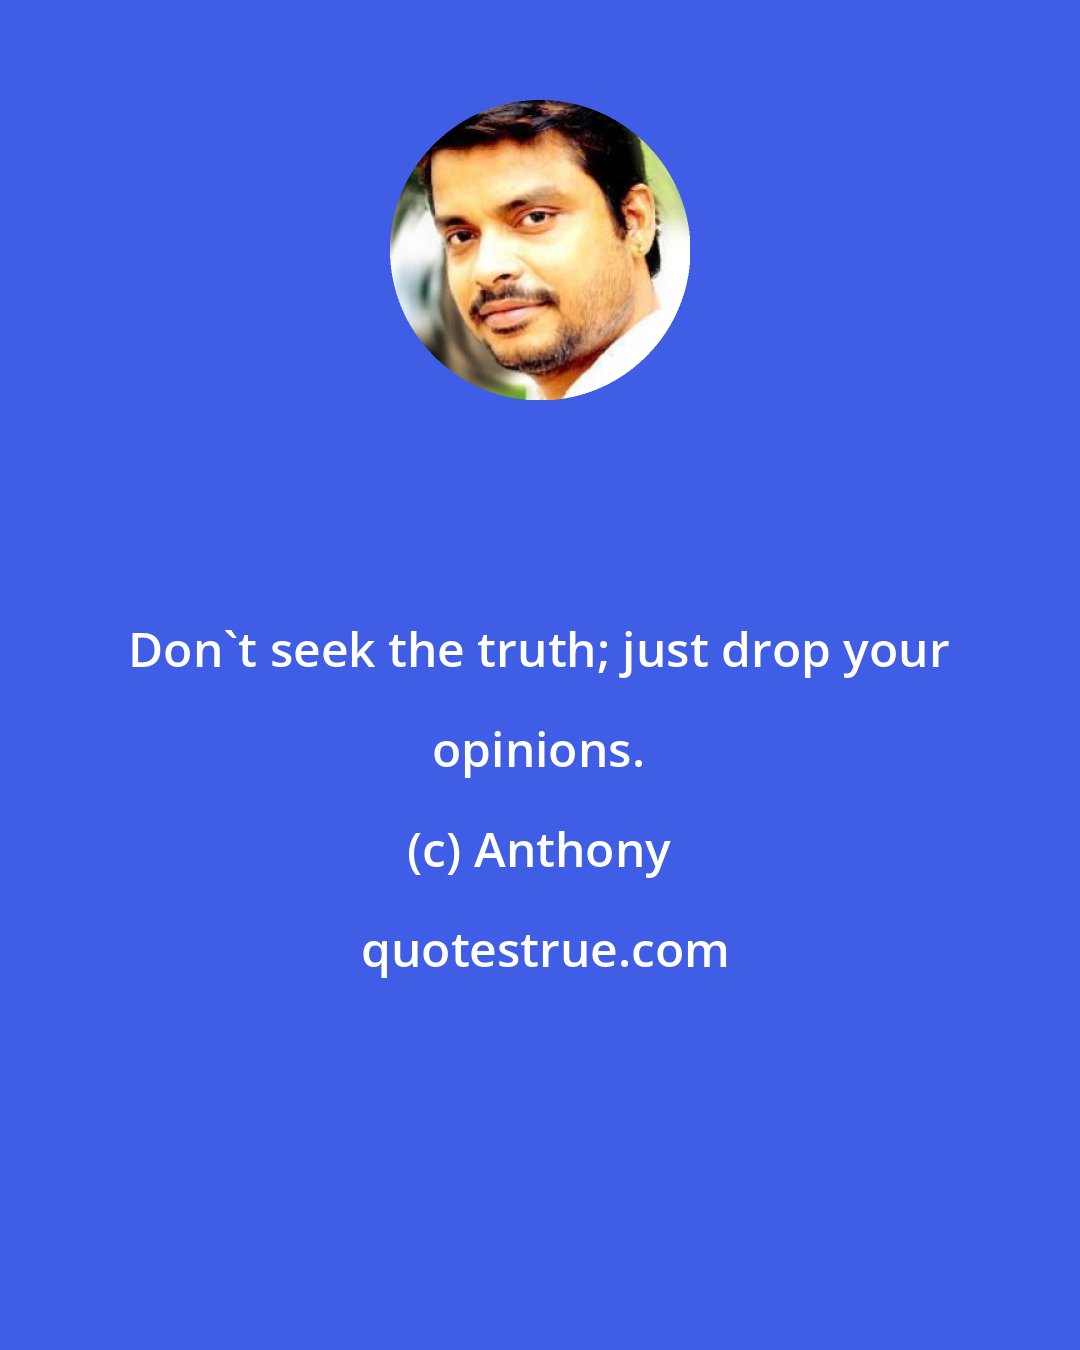 Anthony: Don't seek the truth; just drop your opinions.